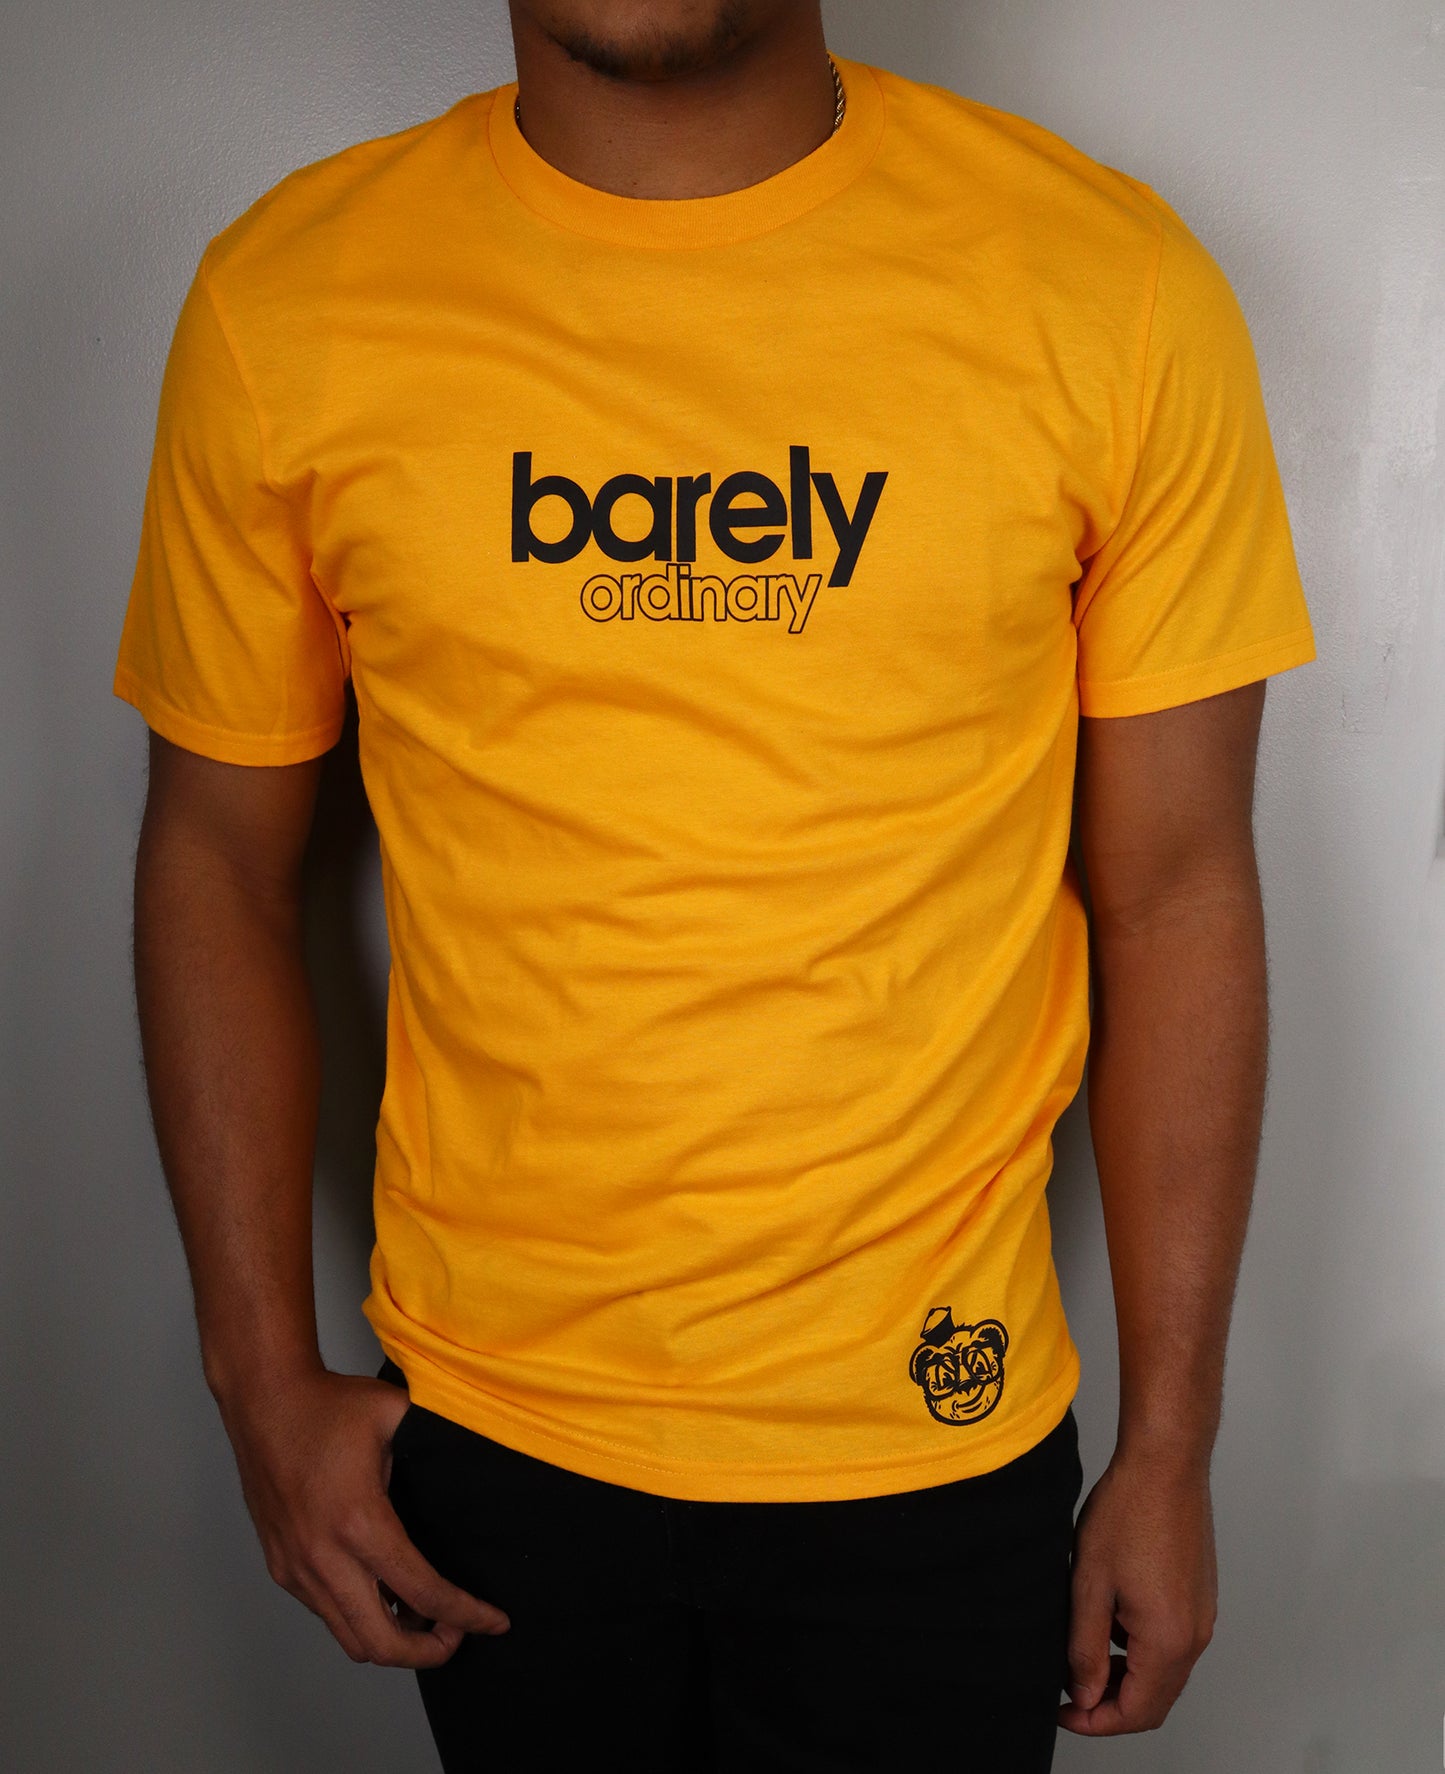 Barely "Stamped" Logo Tee (Gld/Blk) - Barely Ordinary